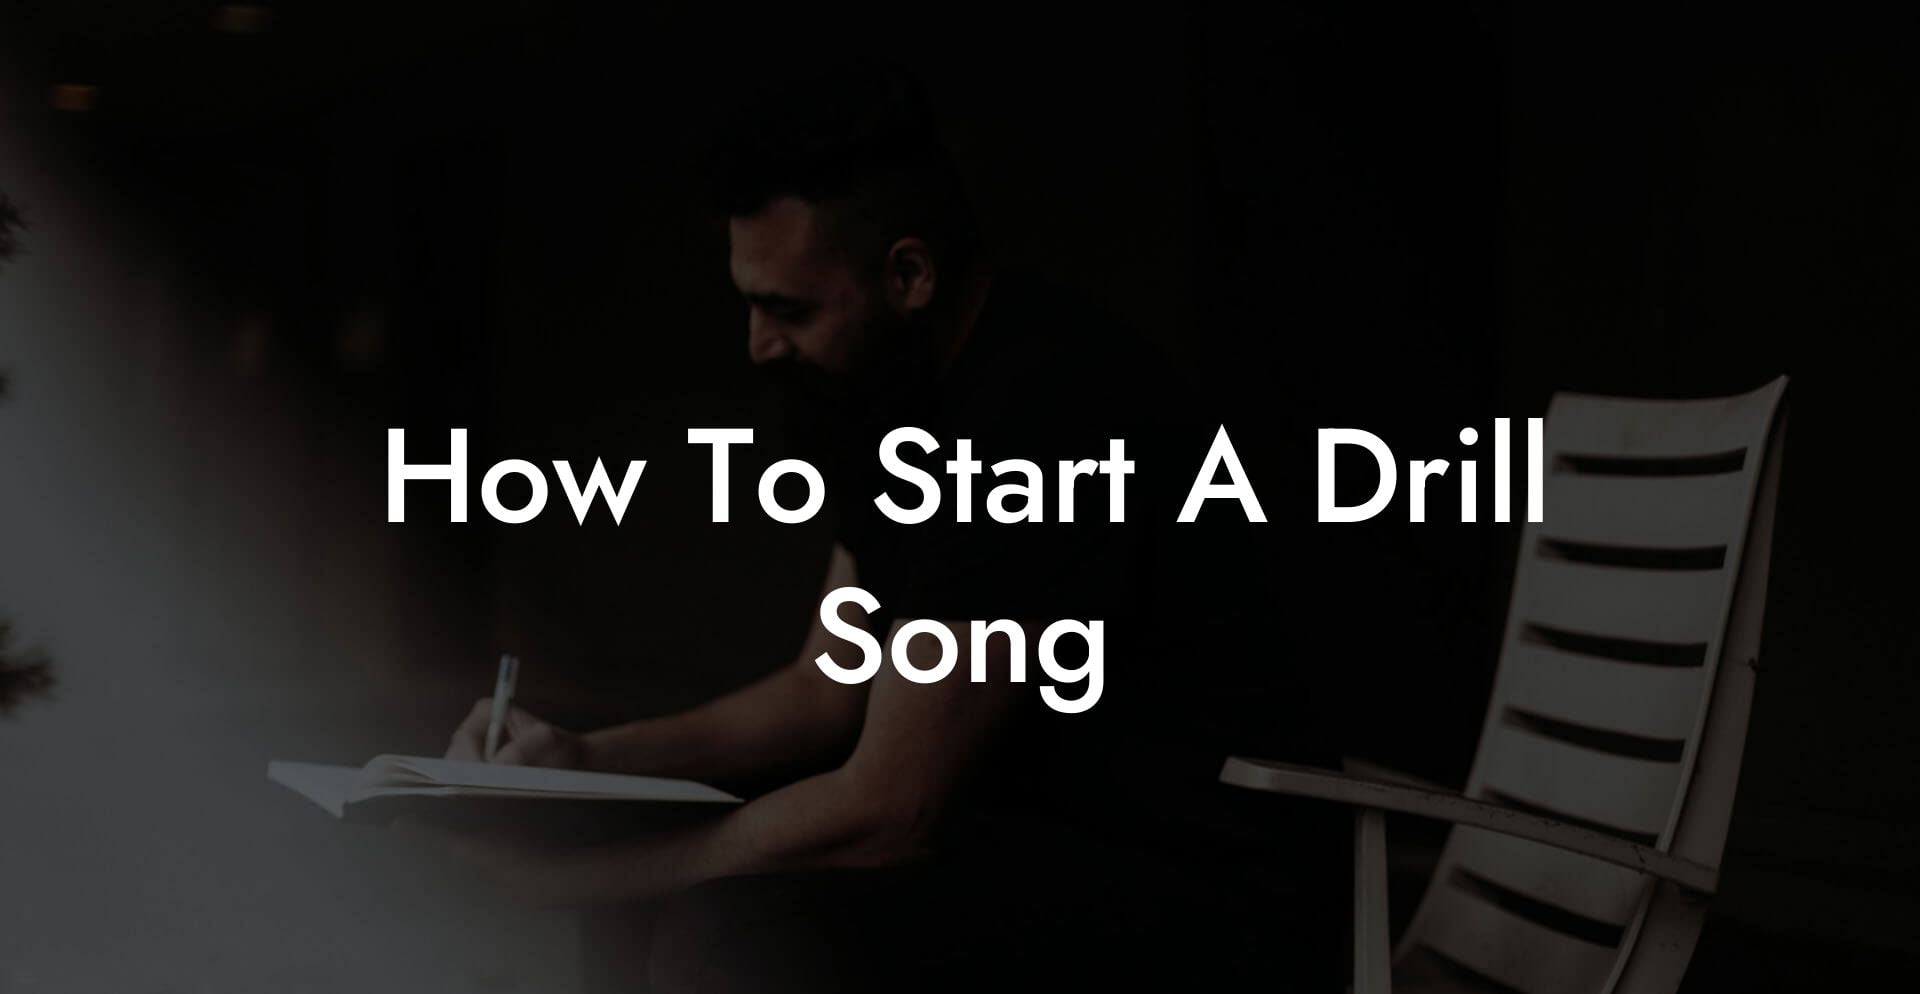 how to start a drill song lyric assistant